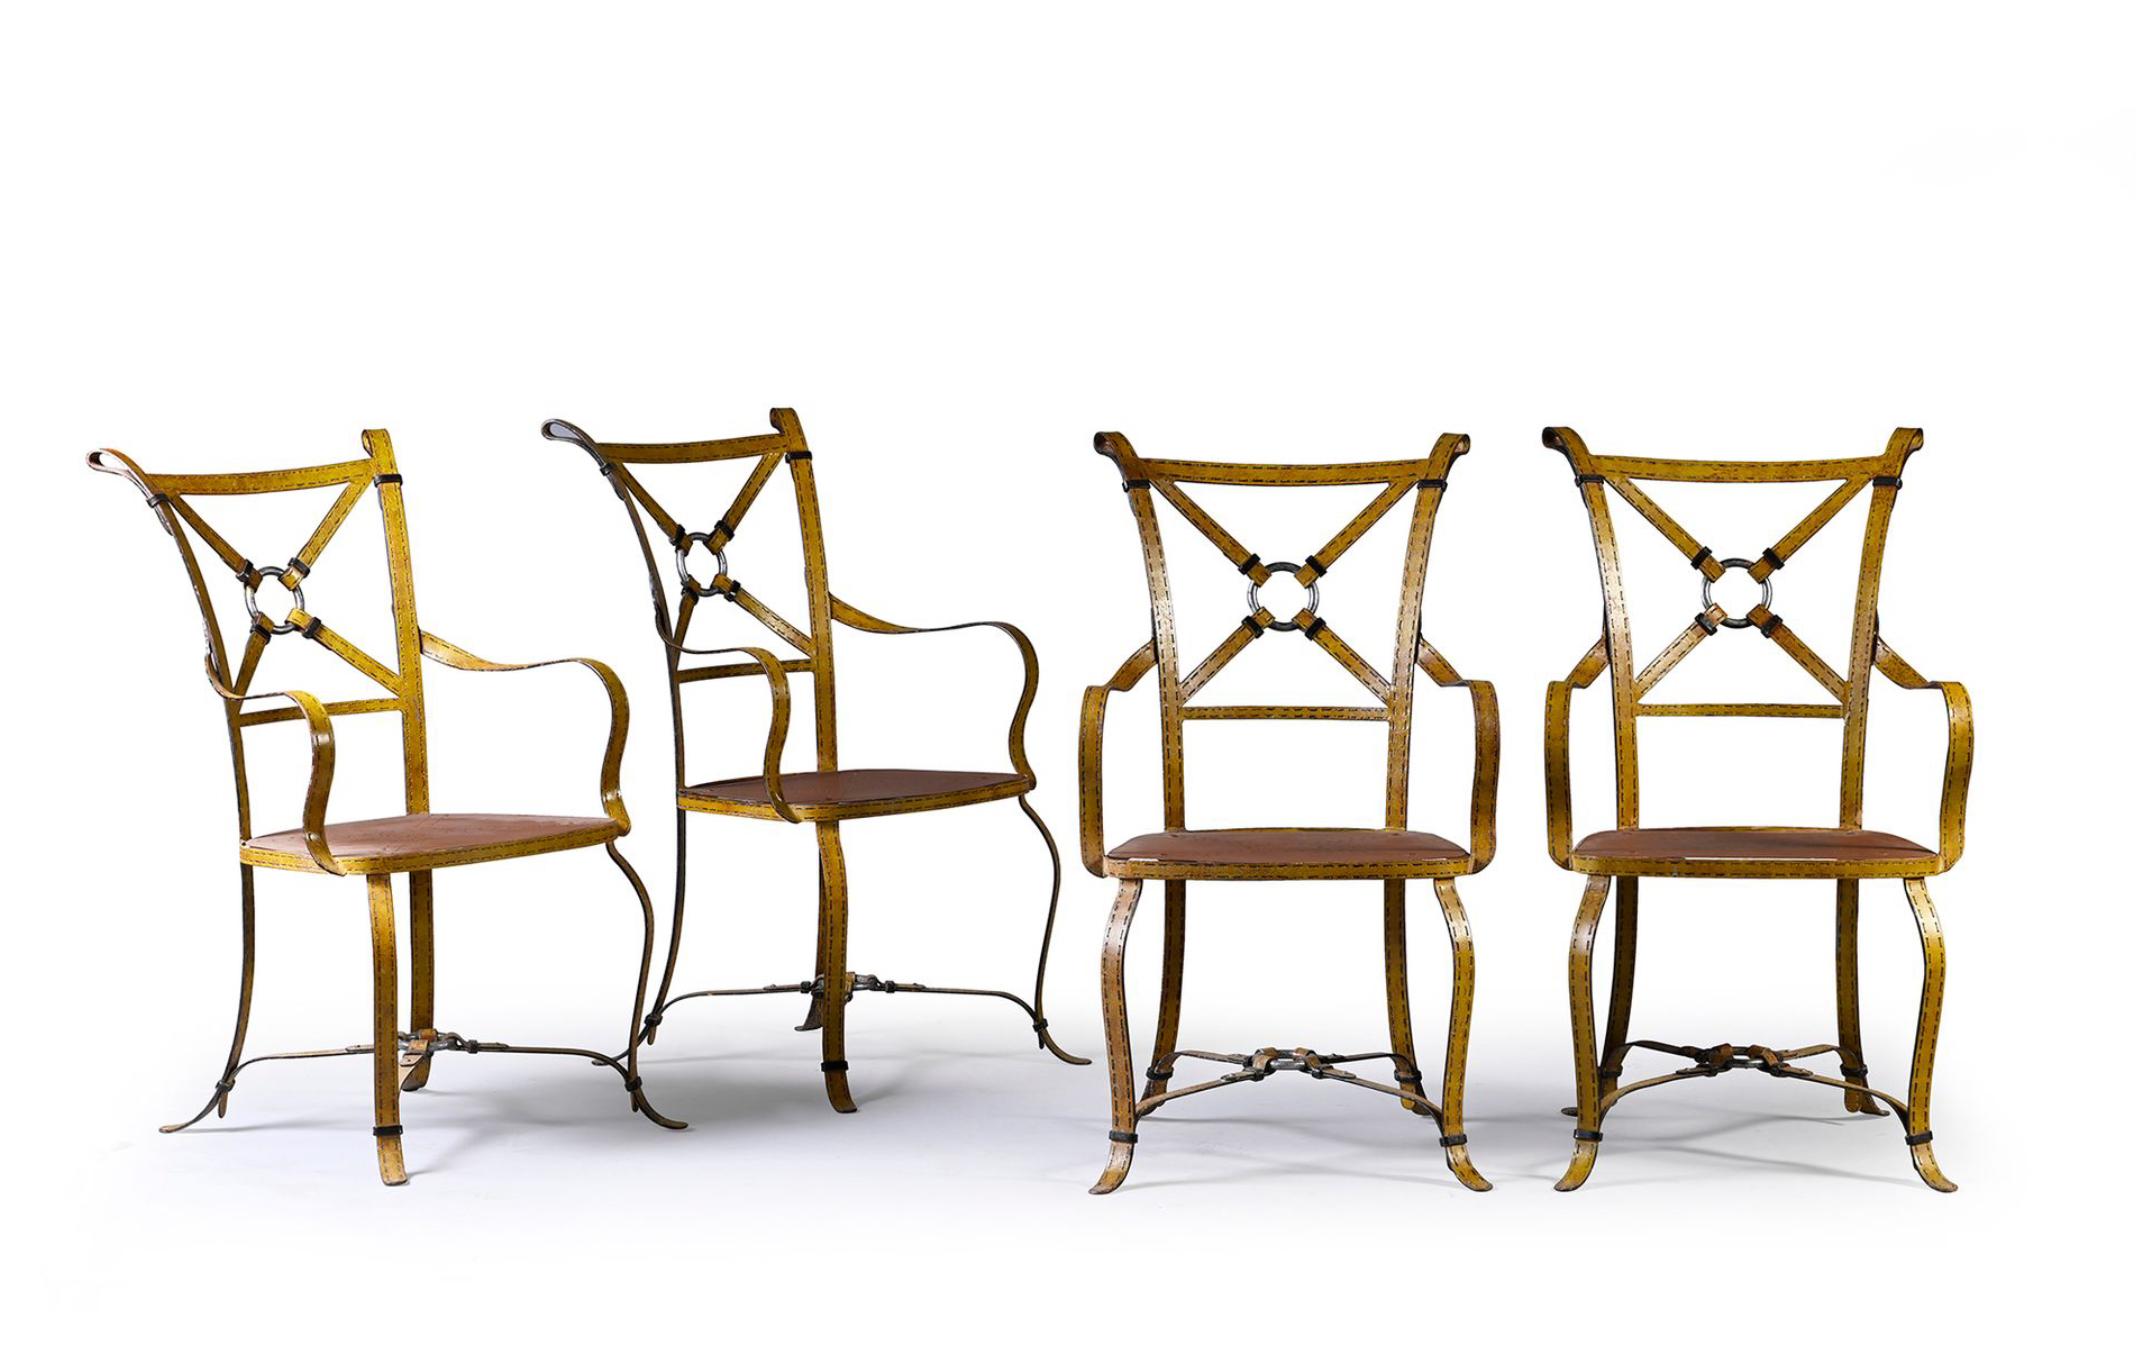 Four French vintage armchairs hand made in wrought iron in imitation of horse harness straps, made in the middle of 20th century. Hand painted in light yellow in very good overall original condition.
Haut.: 97 cm - Larg.: 55 cm - Prof.: 50 cm 